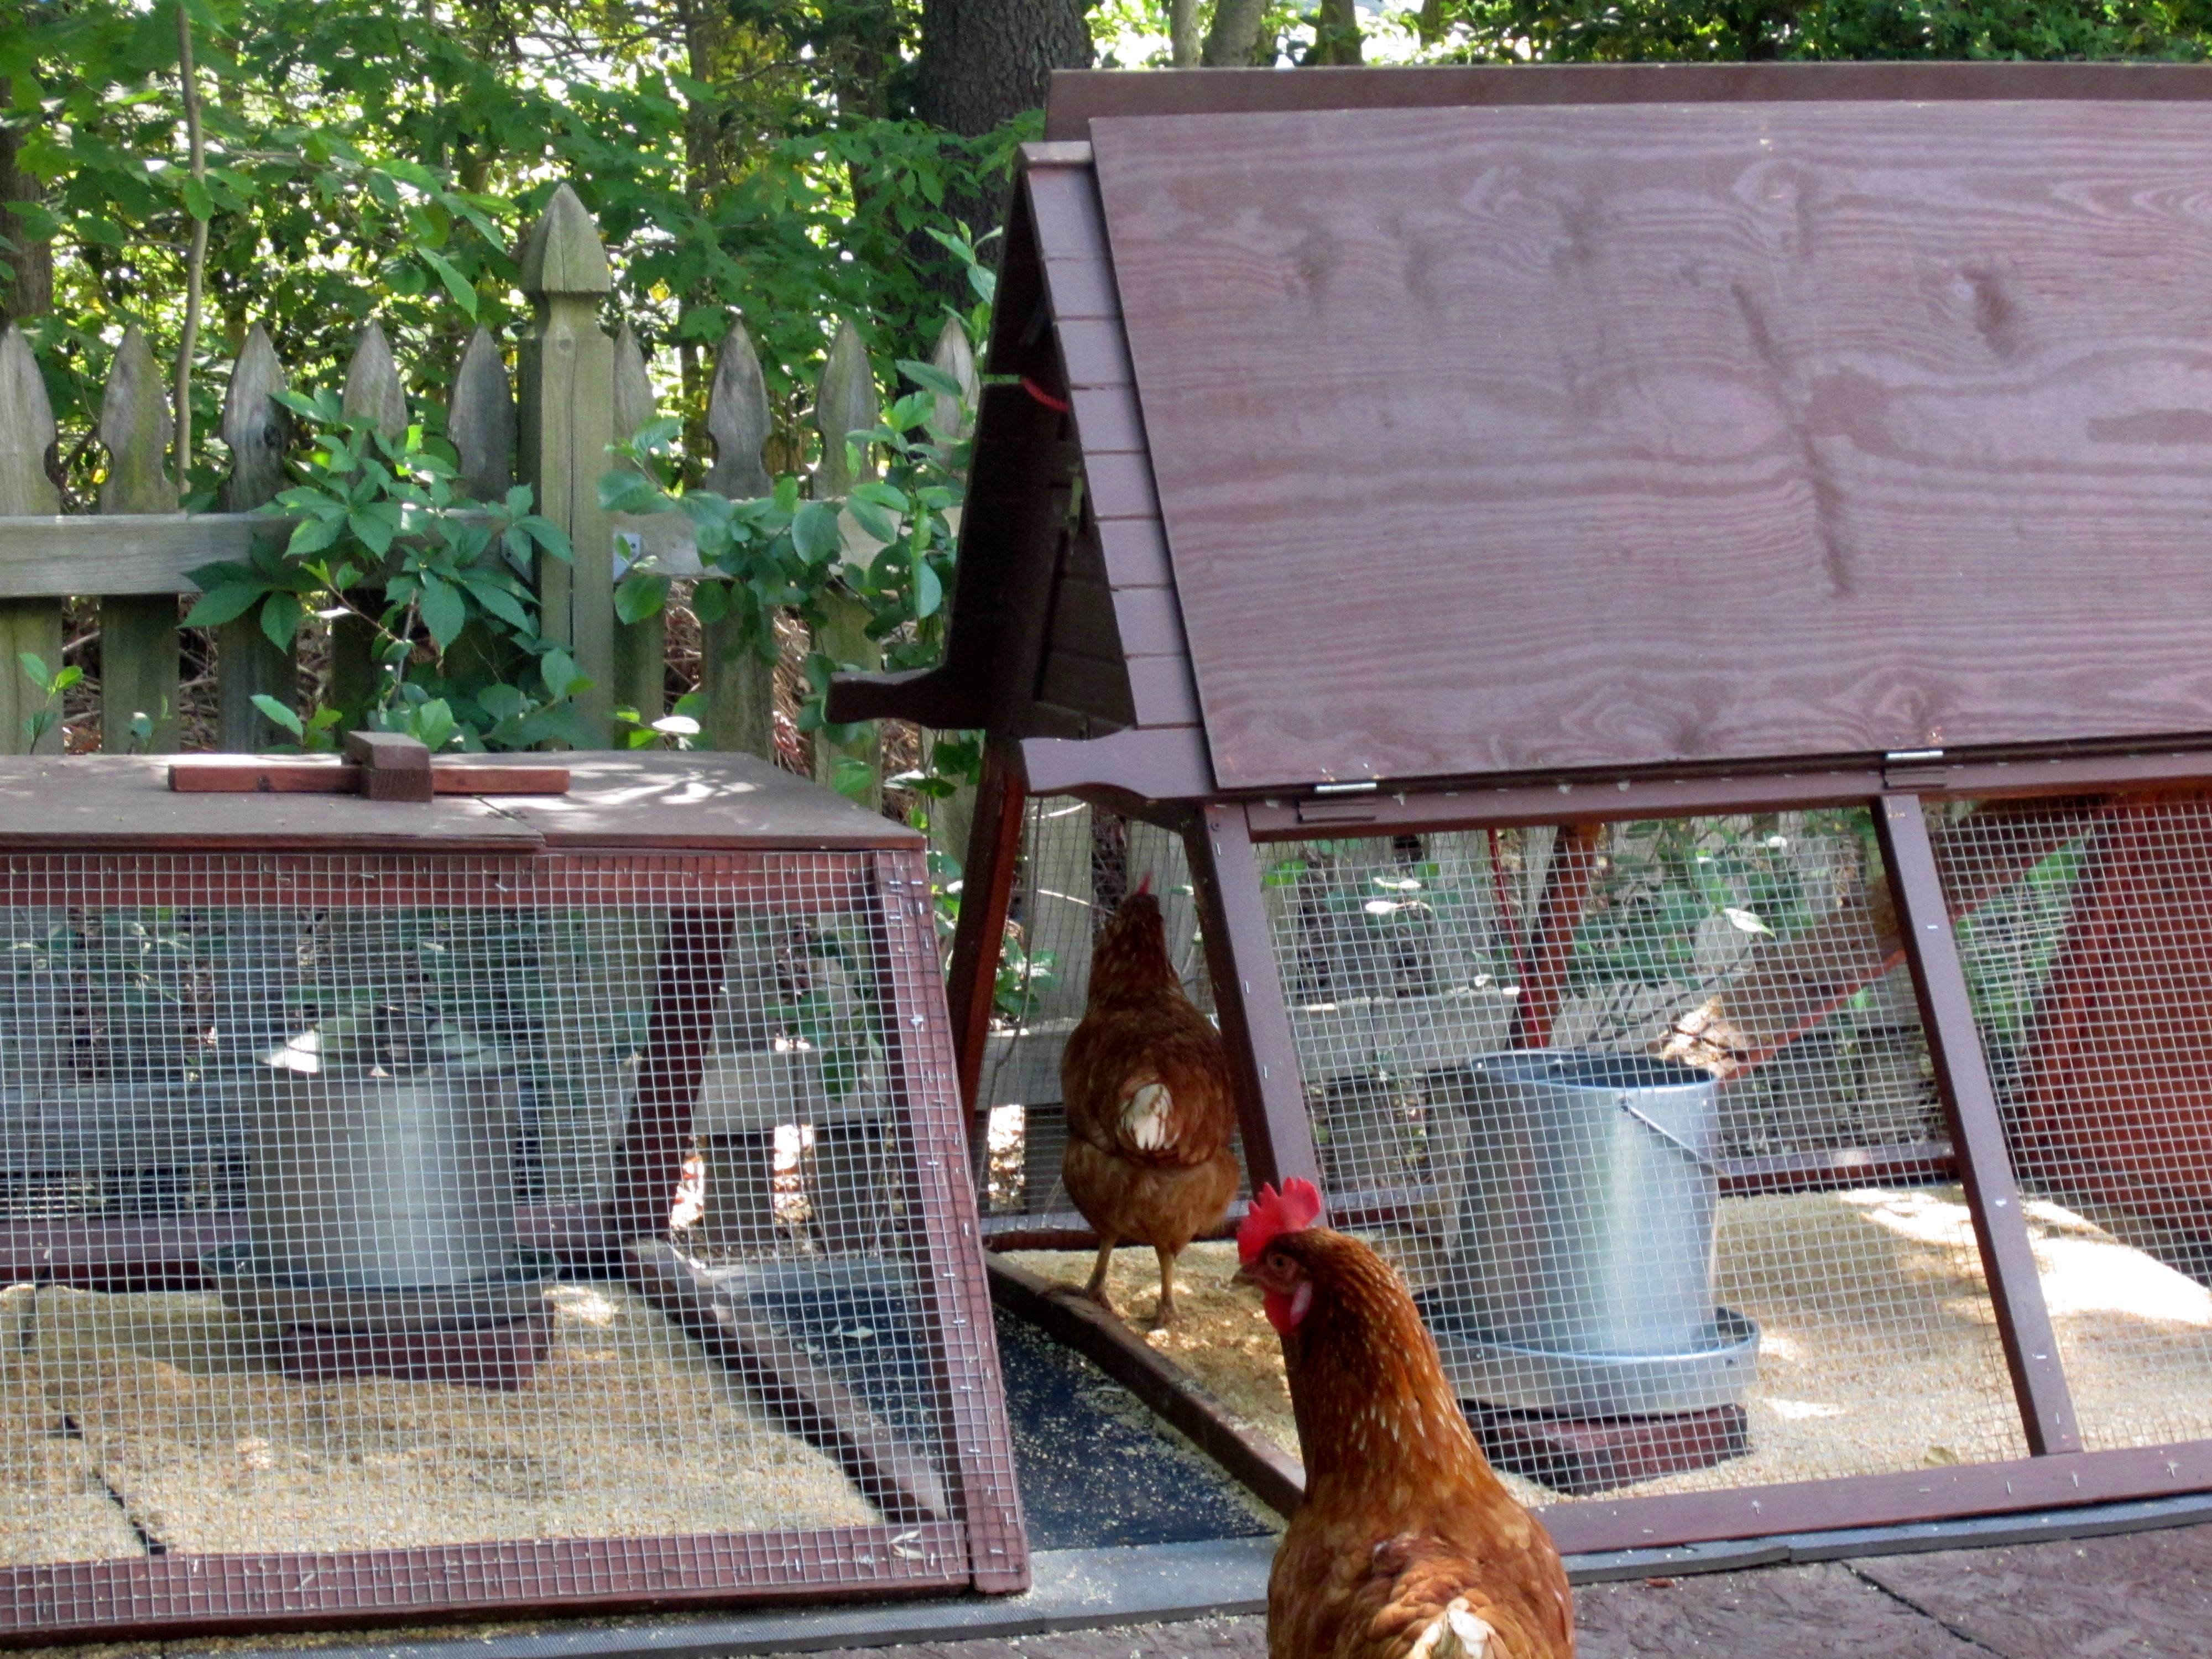 I put side flaps on the Ark coop that I can raise or lower.  Helps keep the rain out of the coop part.  I also built a platform but I am getting rid of it as I have a dog kennel on order which I am going to paint black and then just put the coop in there with no run.  I have a 30 foot x 50 foot fenced area they can run about during the day.  Eventually I am getting rid of this coop too and getting a sturdier and leak proof model.   Live and learn.